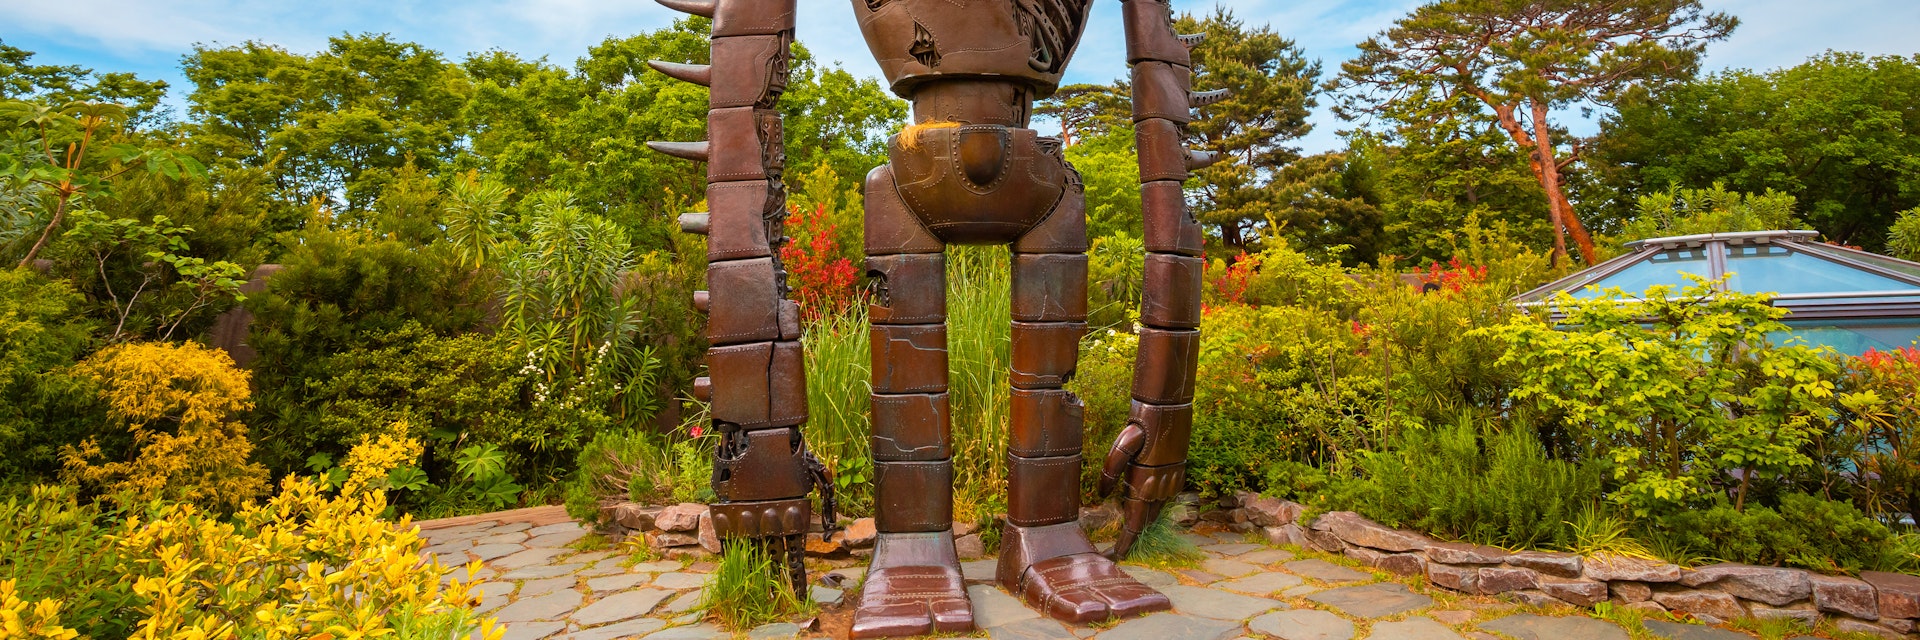 April 29, 2018: The Robot statue in an open garden space at the Ghibli museum.